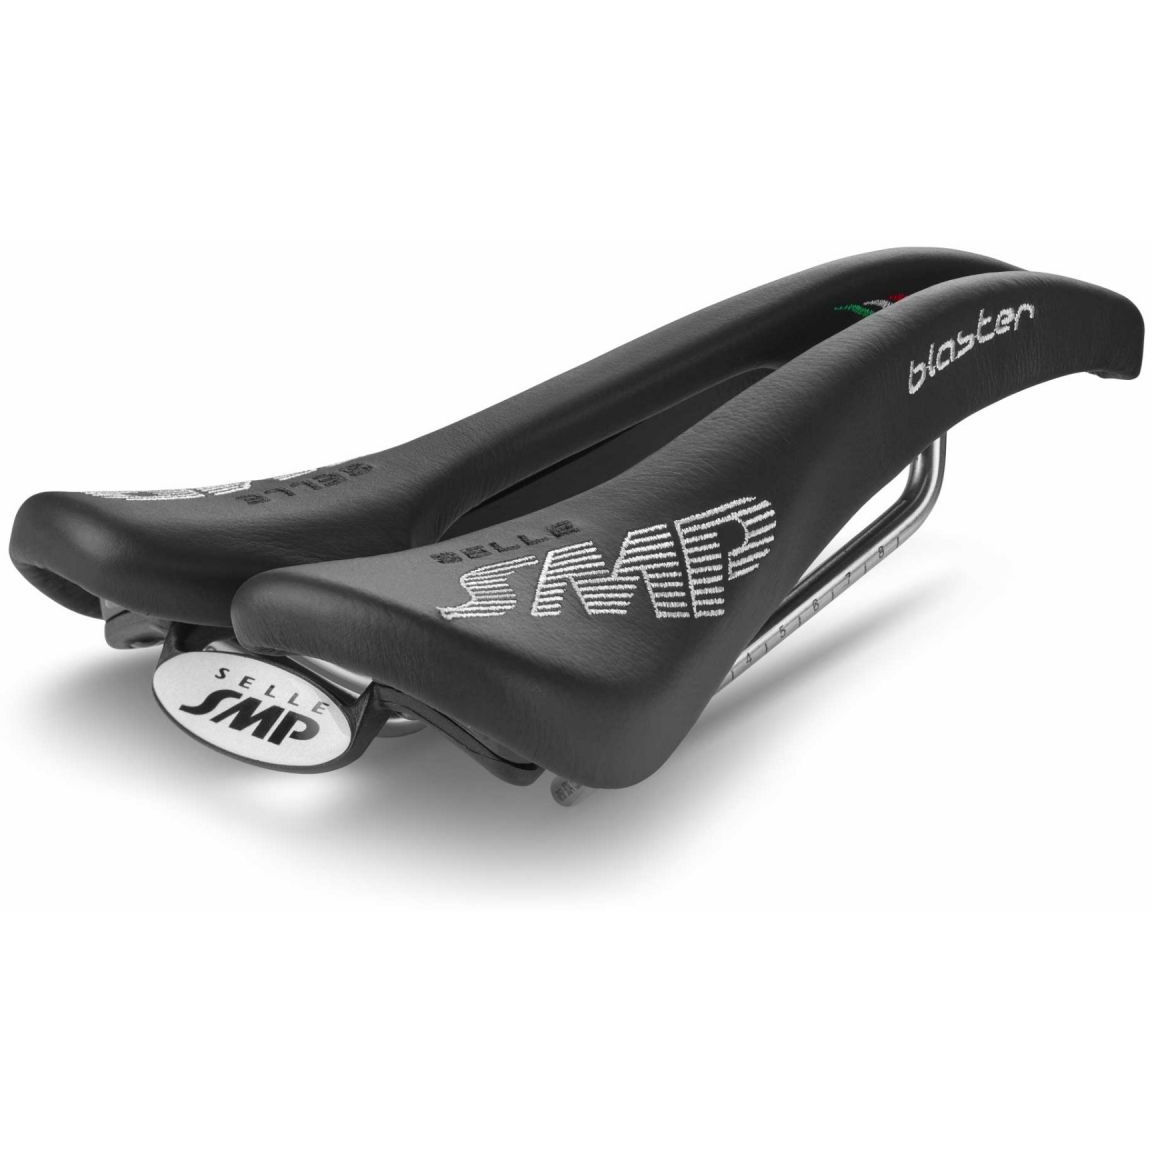 Picture of Selle SMP Blaster Saddle - black